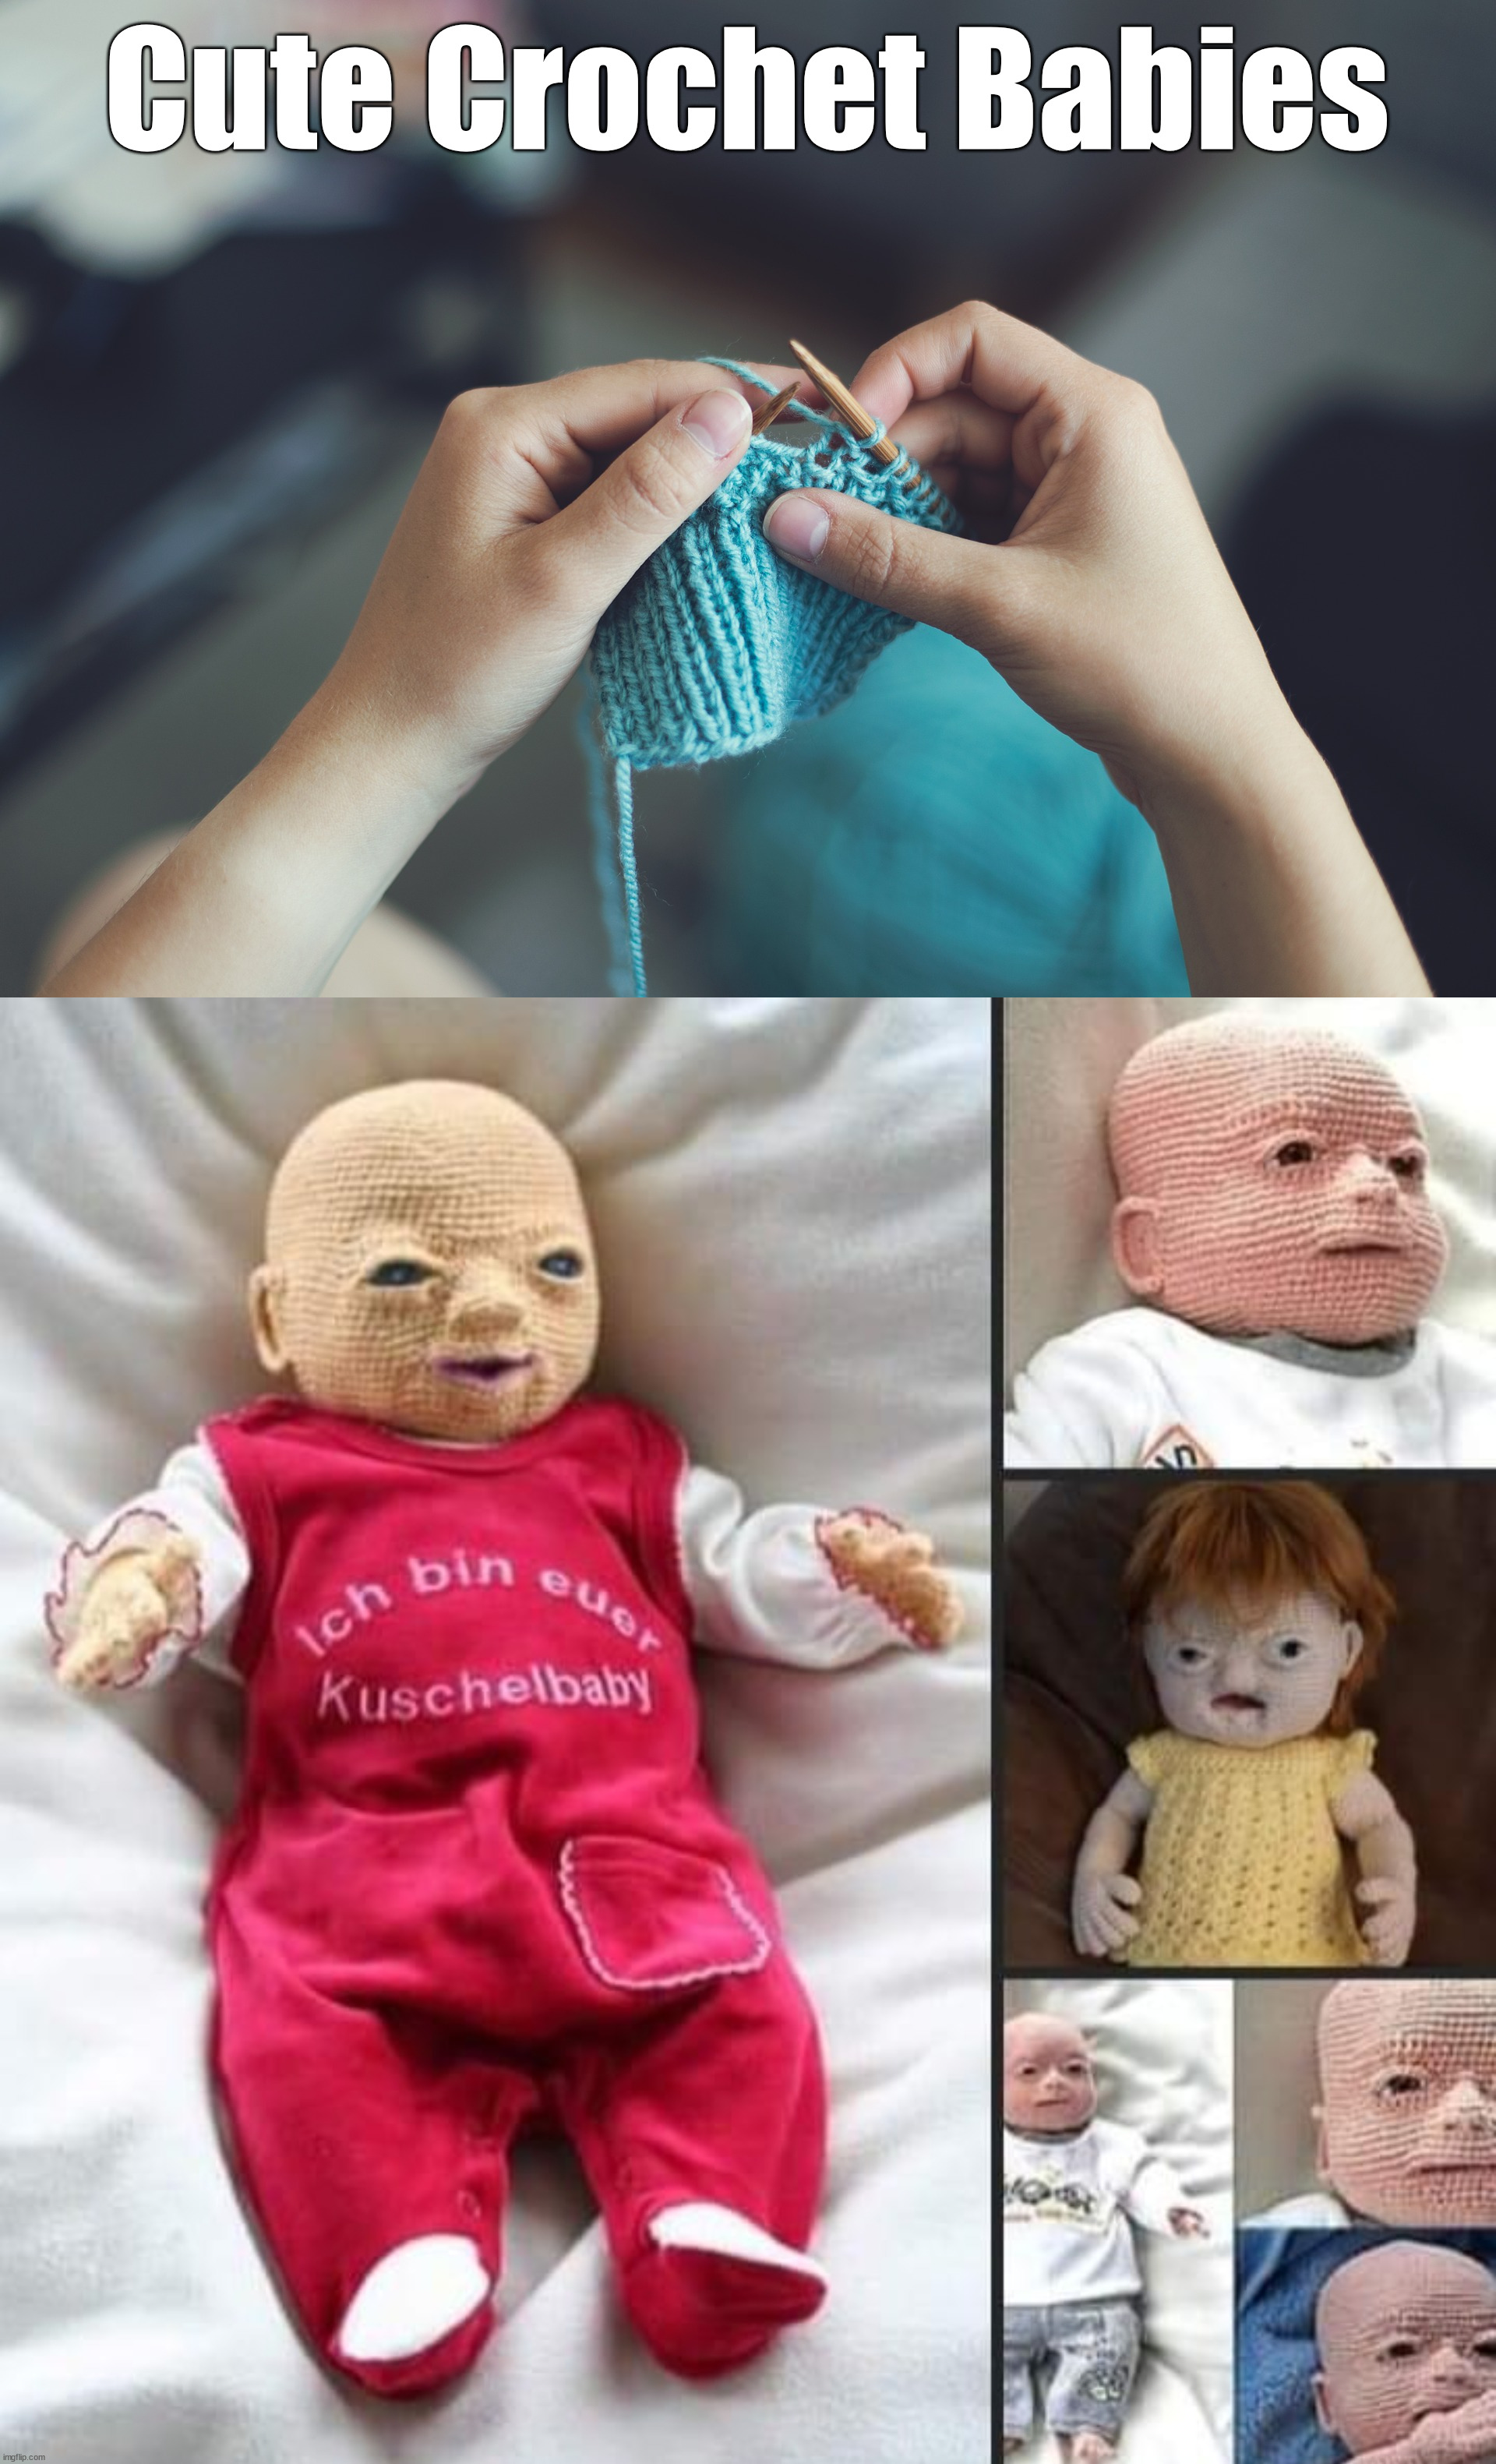 The horror | Cute Crochet Babies | image tagged in crochet woman yarn needle,cursed image | made w/ Imgflip meme maker